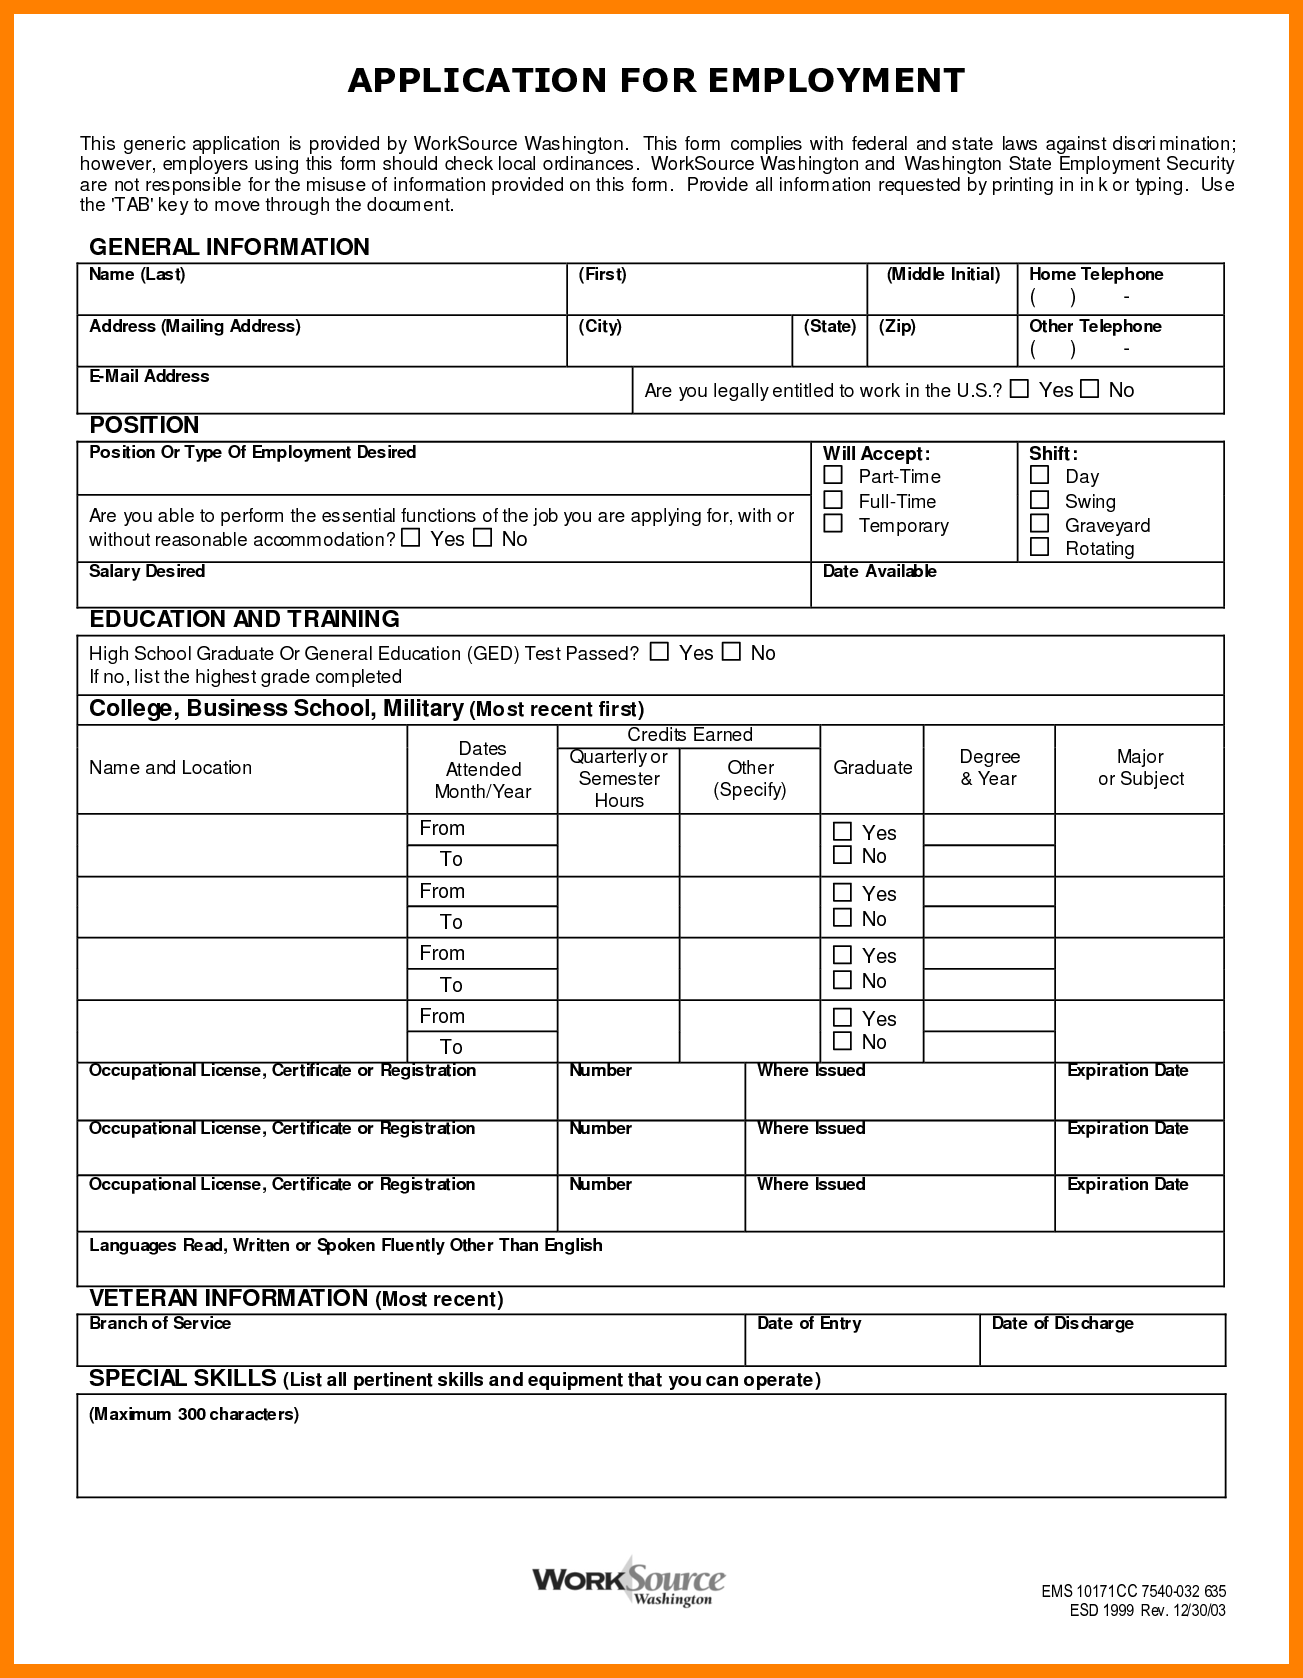 Job application forms to print out